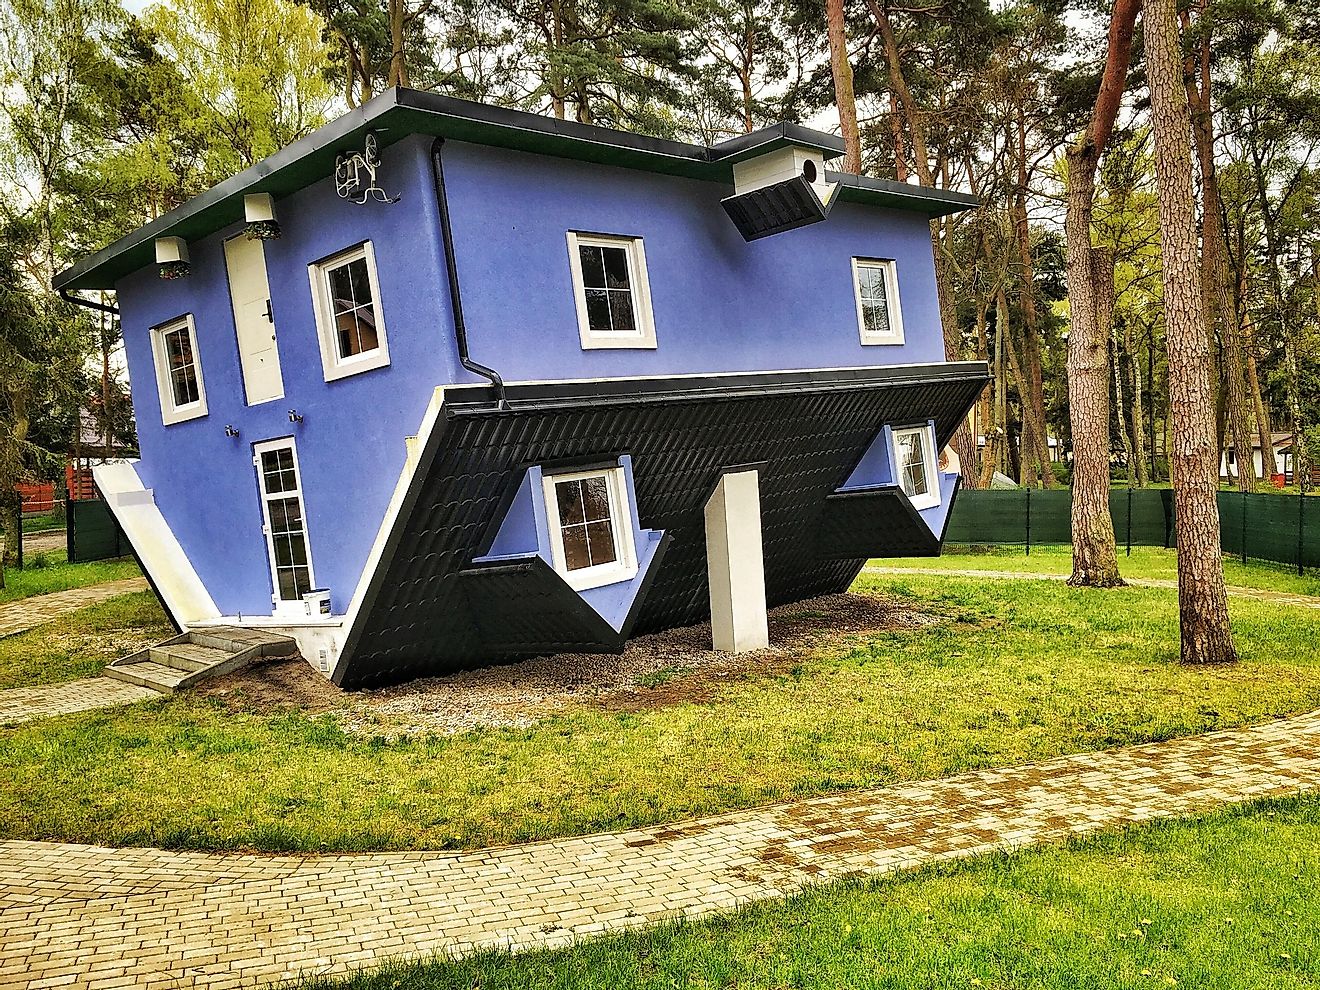 Upside-down houses often make visitors feel dizzy and disoriented. Editorial credit: Fotokon / Shutterstock.com